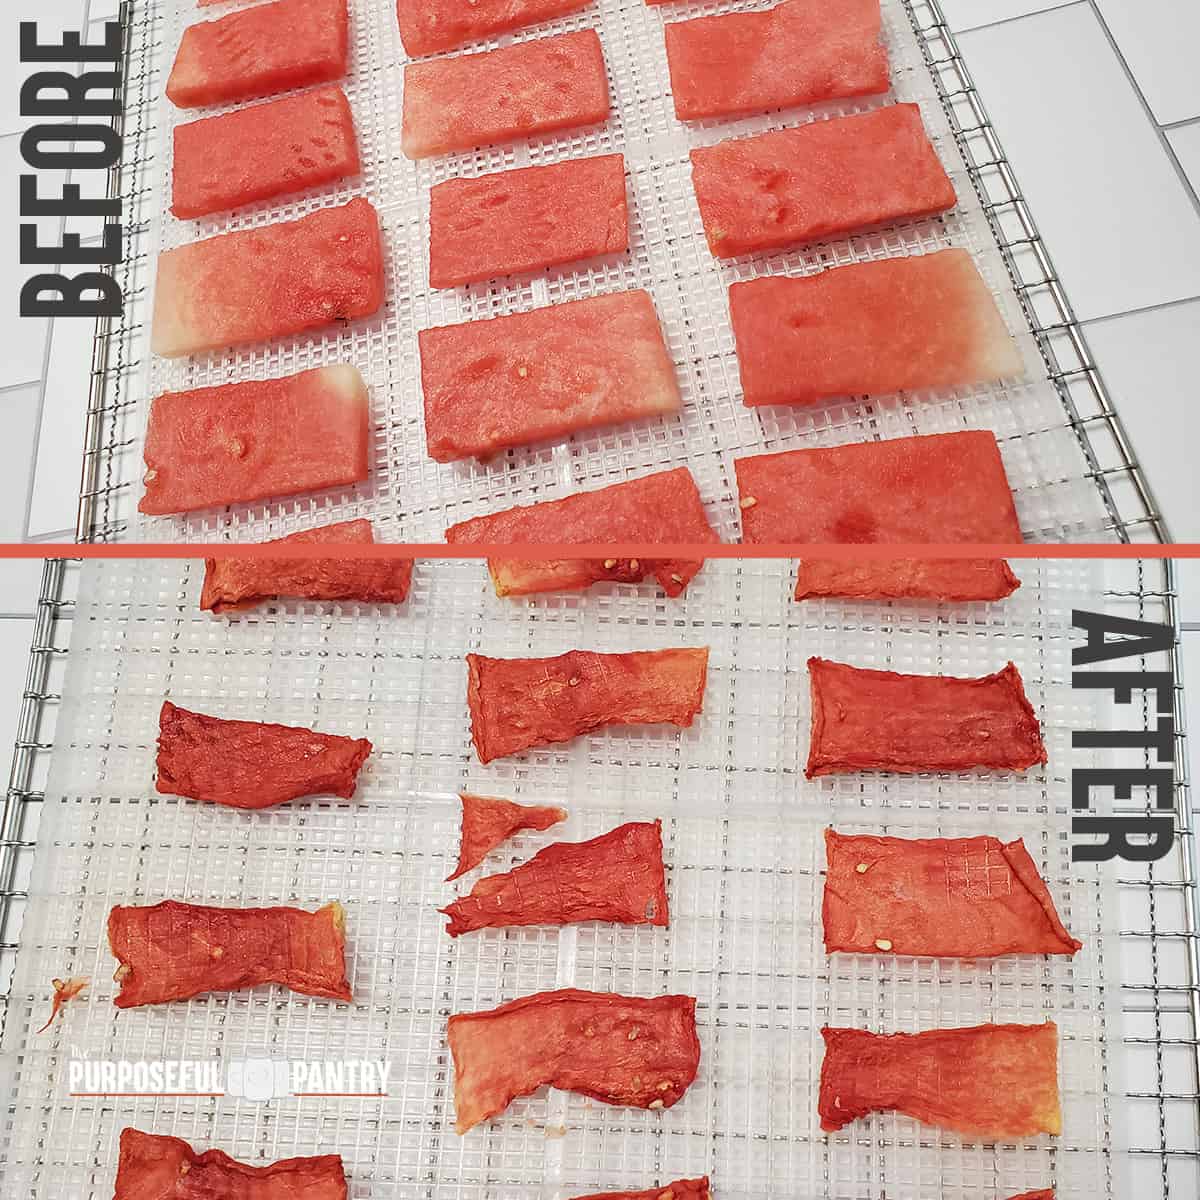 How Dehydrate Watermelon - The Purposeful Pantry